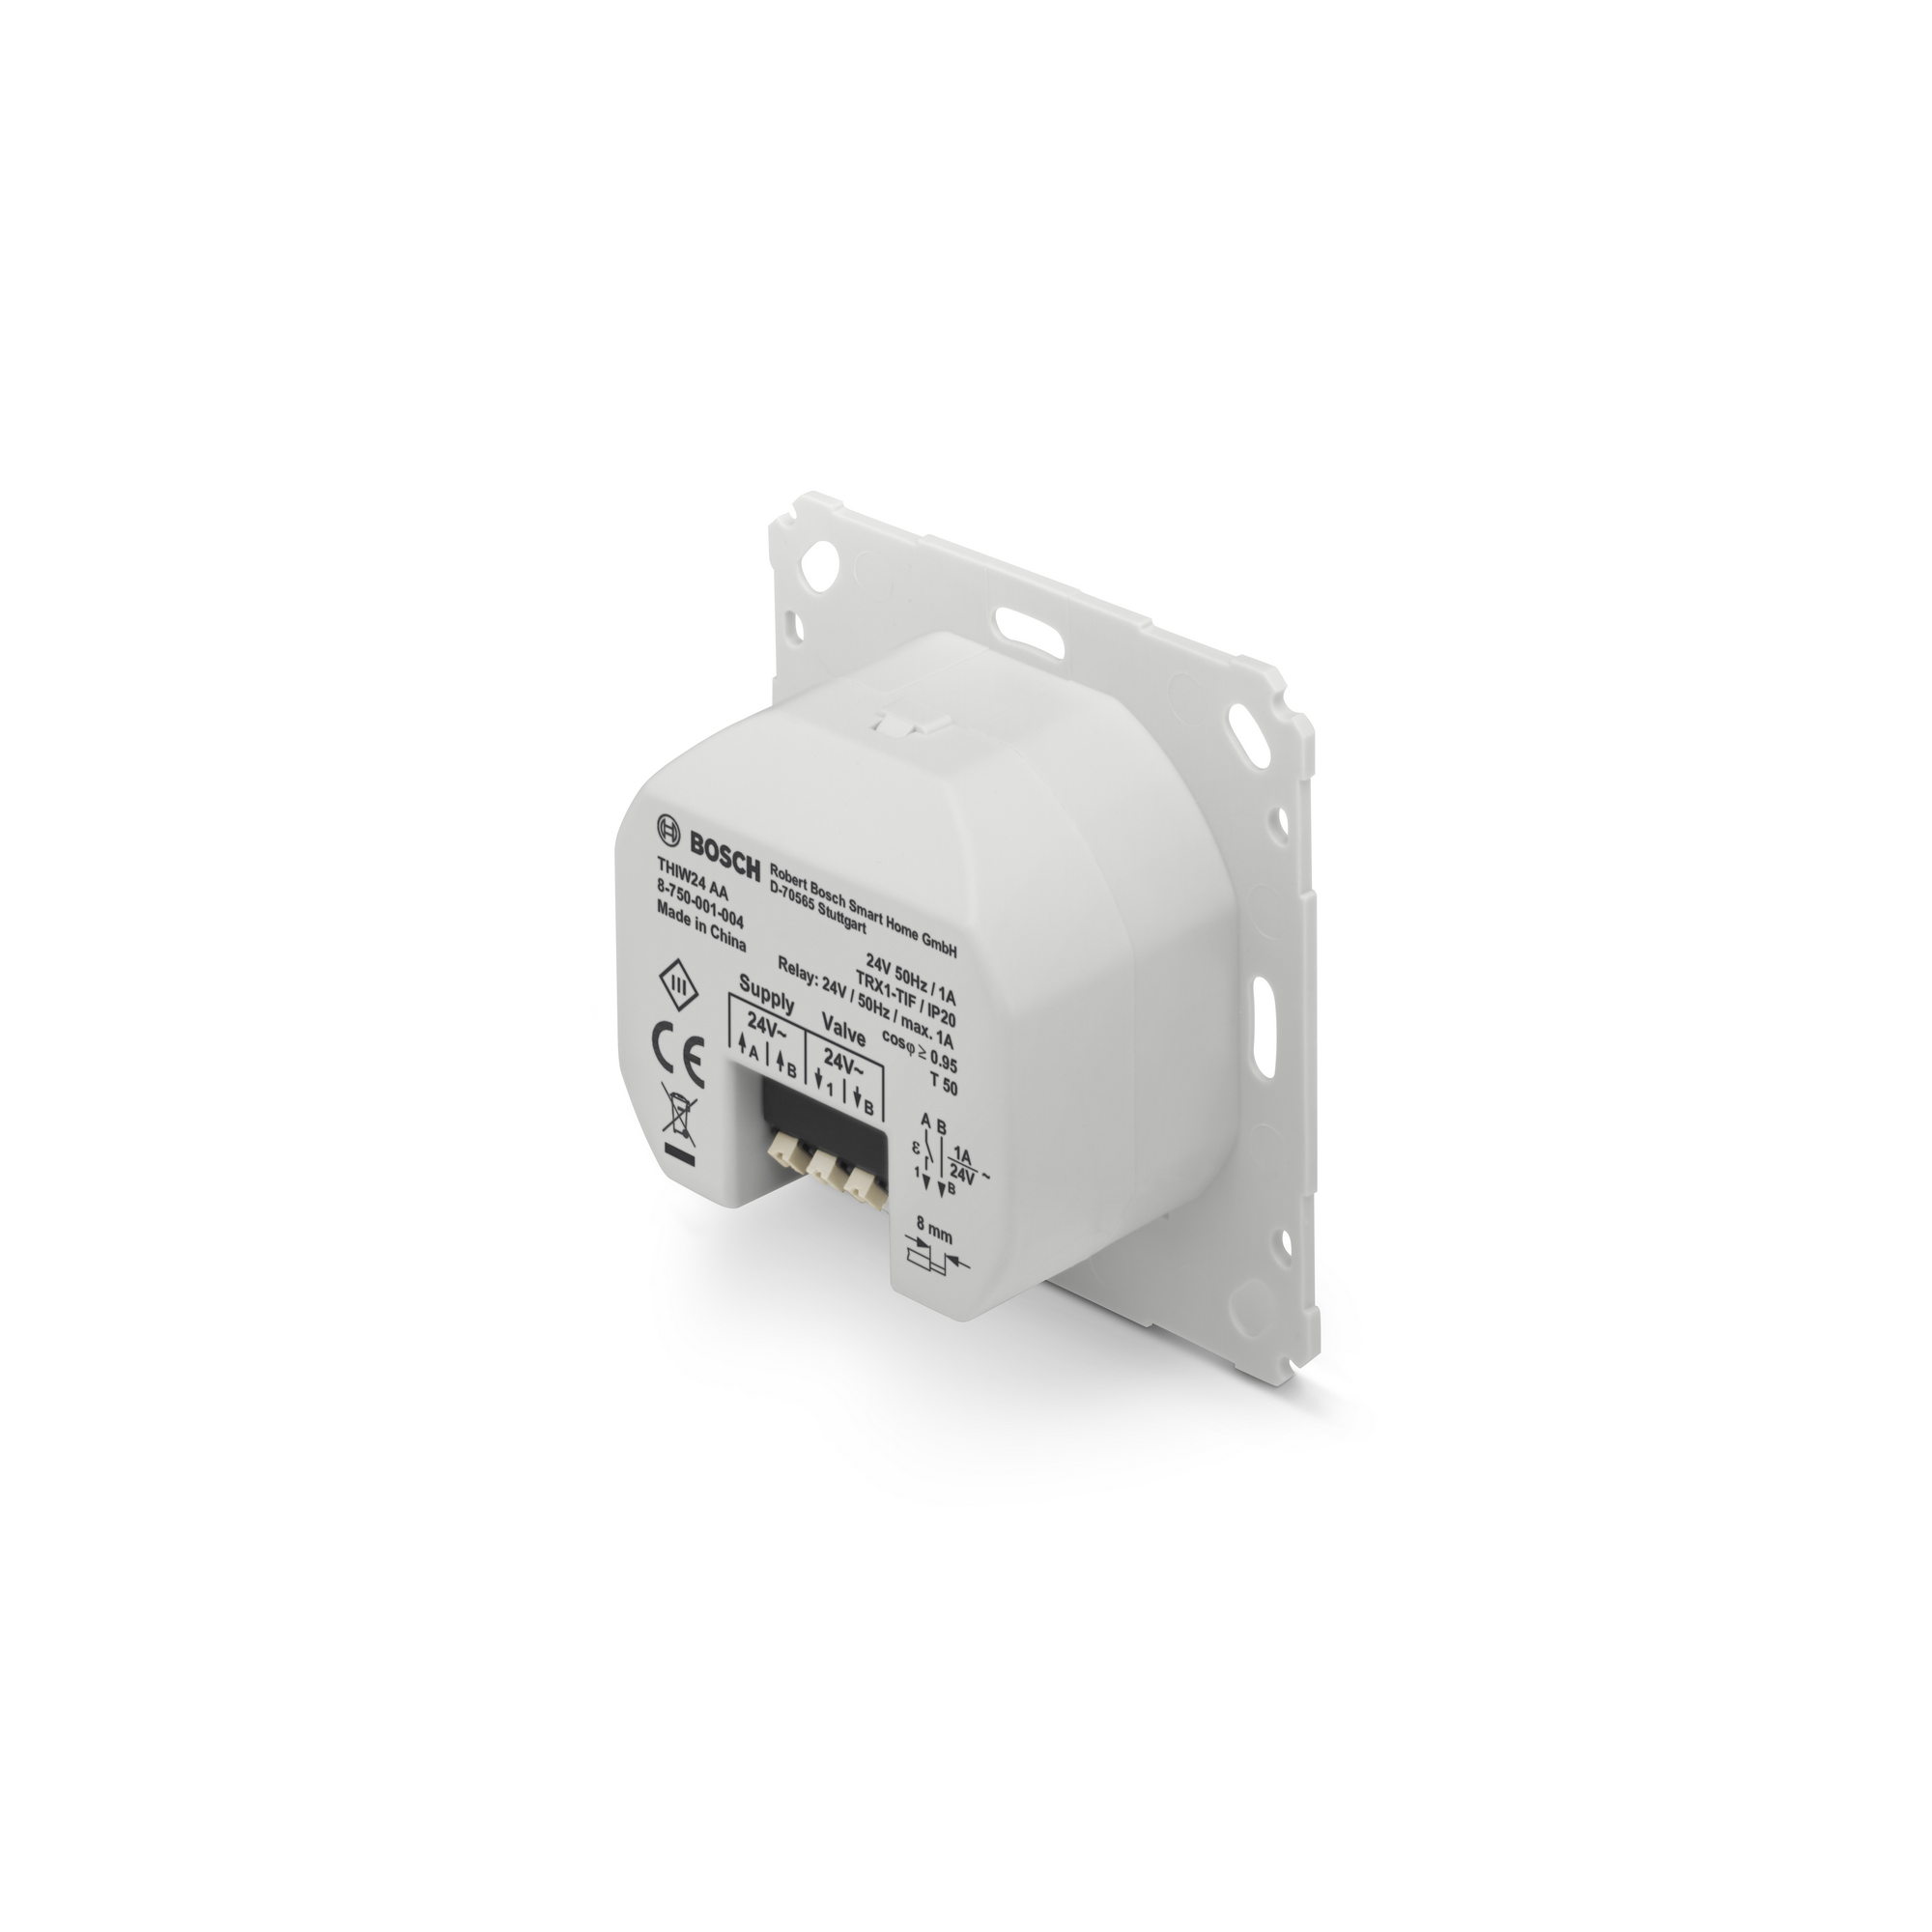 Smart Home Raumthermostat 24 V + product picture